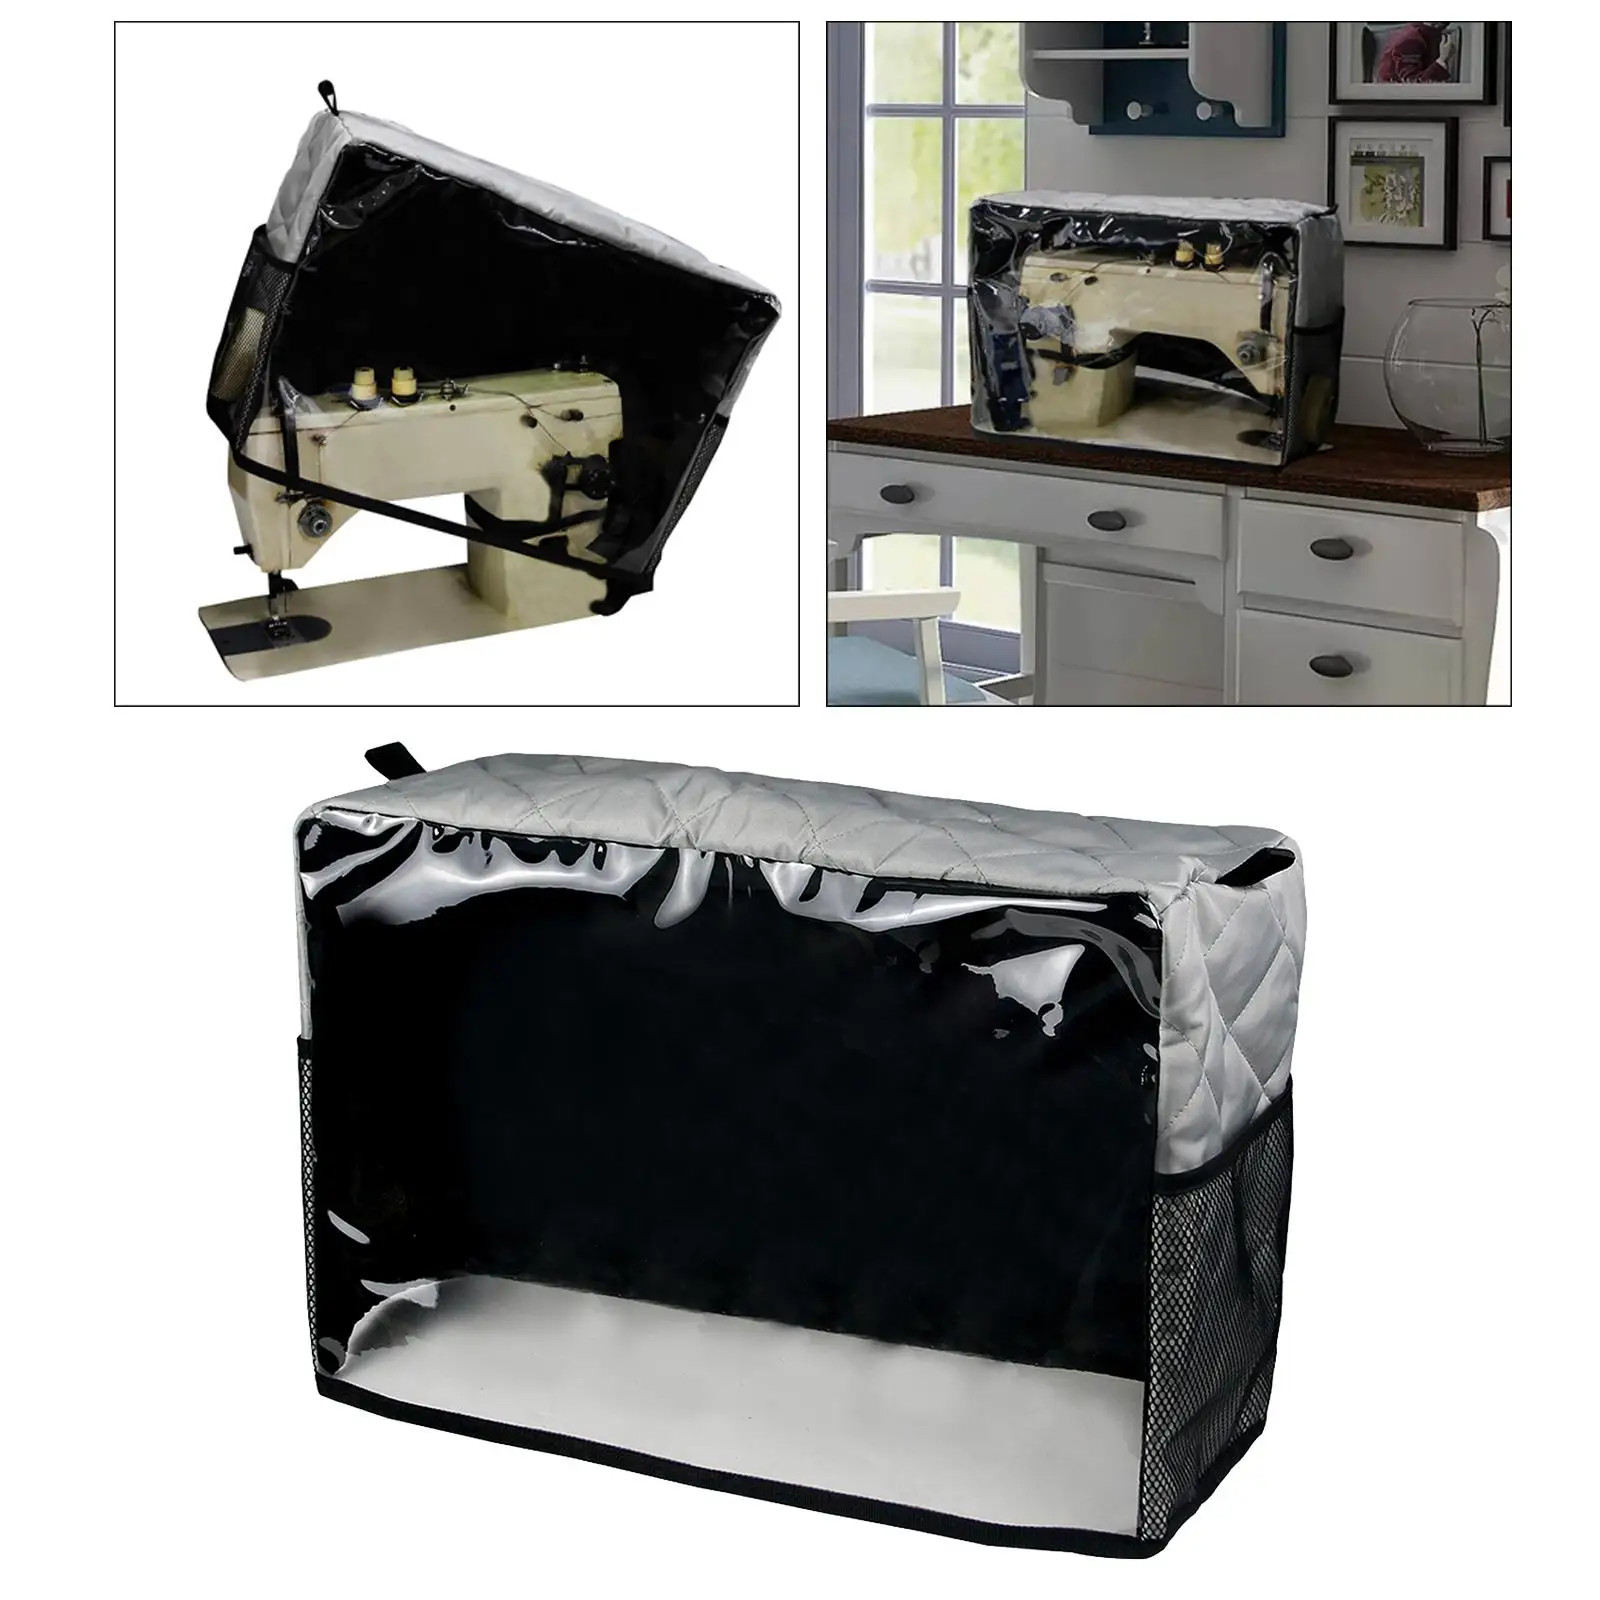 Sewing Machine Cover Protective Dust Cover Waterproof for Sewing Machine